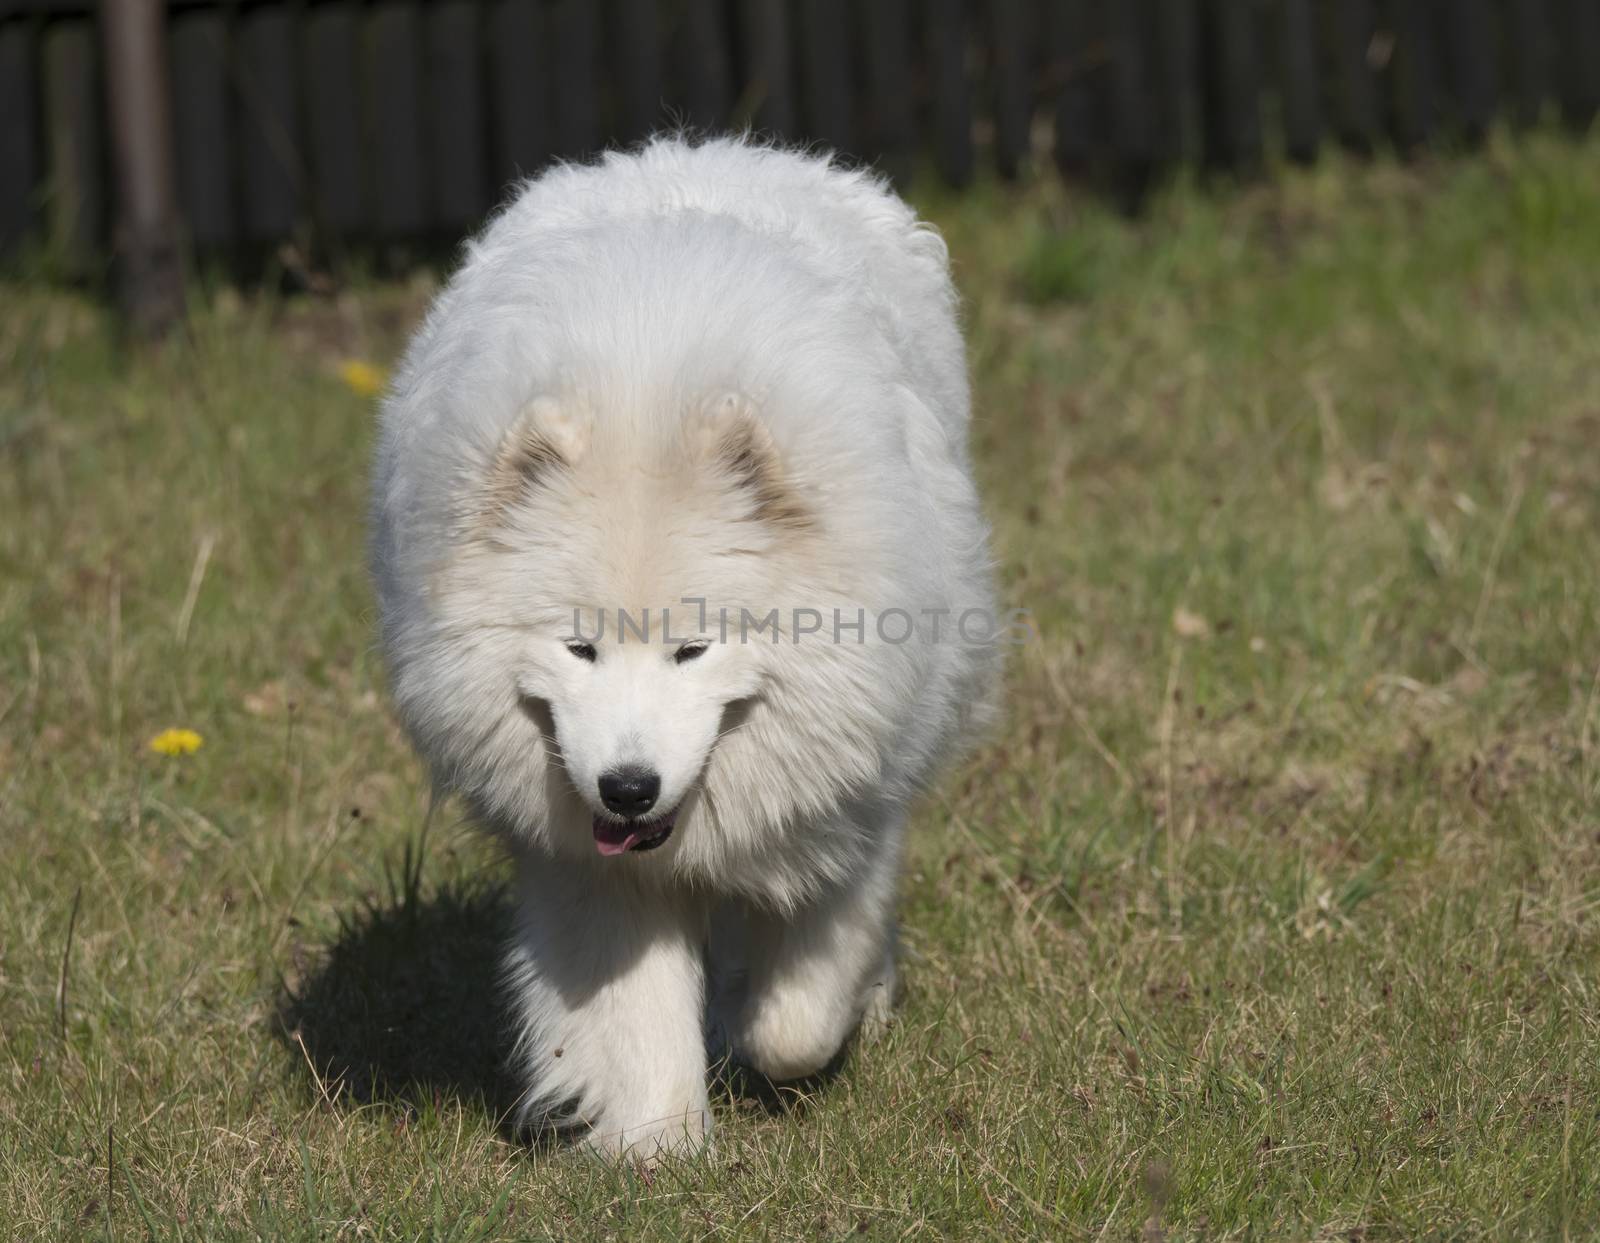 young Samoyed dog with white fluffy coat and tongue sticking out walking on the green grass garden. Cute happy Russian Bjelkier dog is a breed of large herding dogs